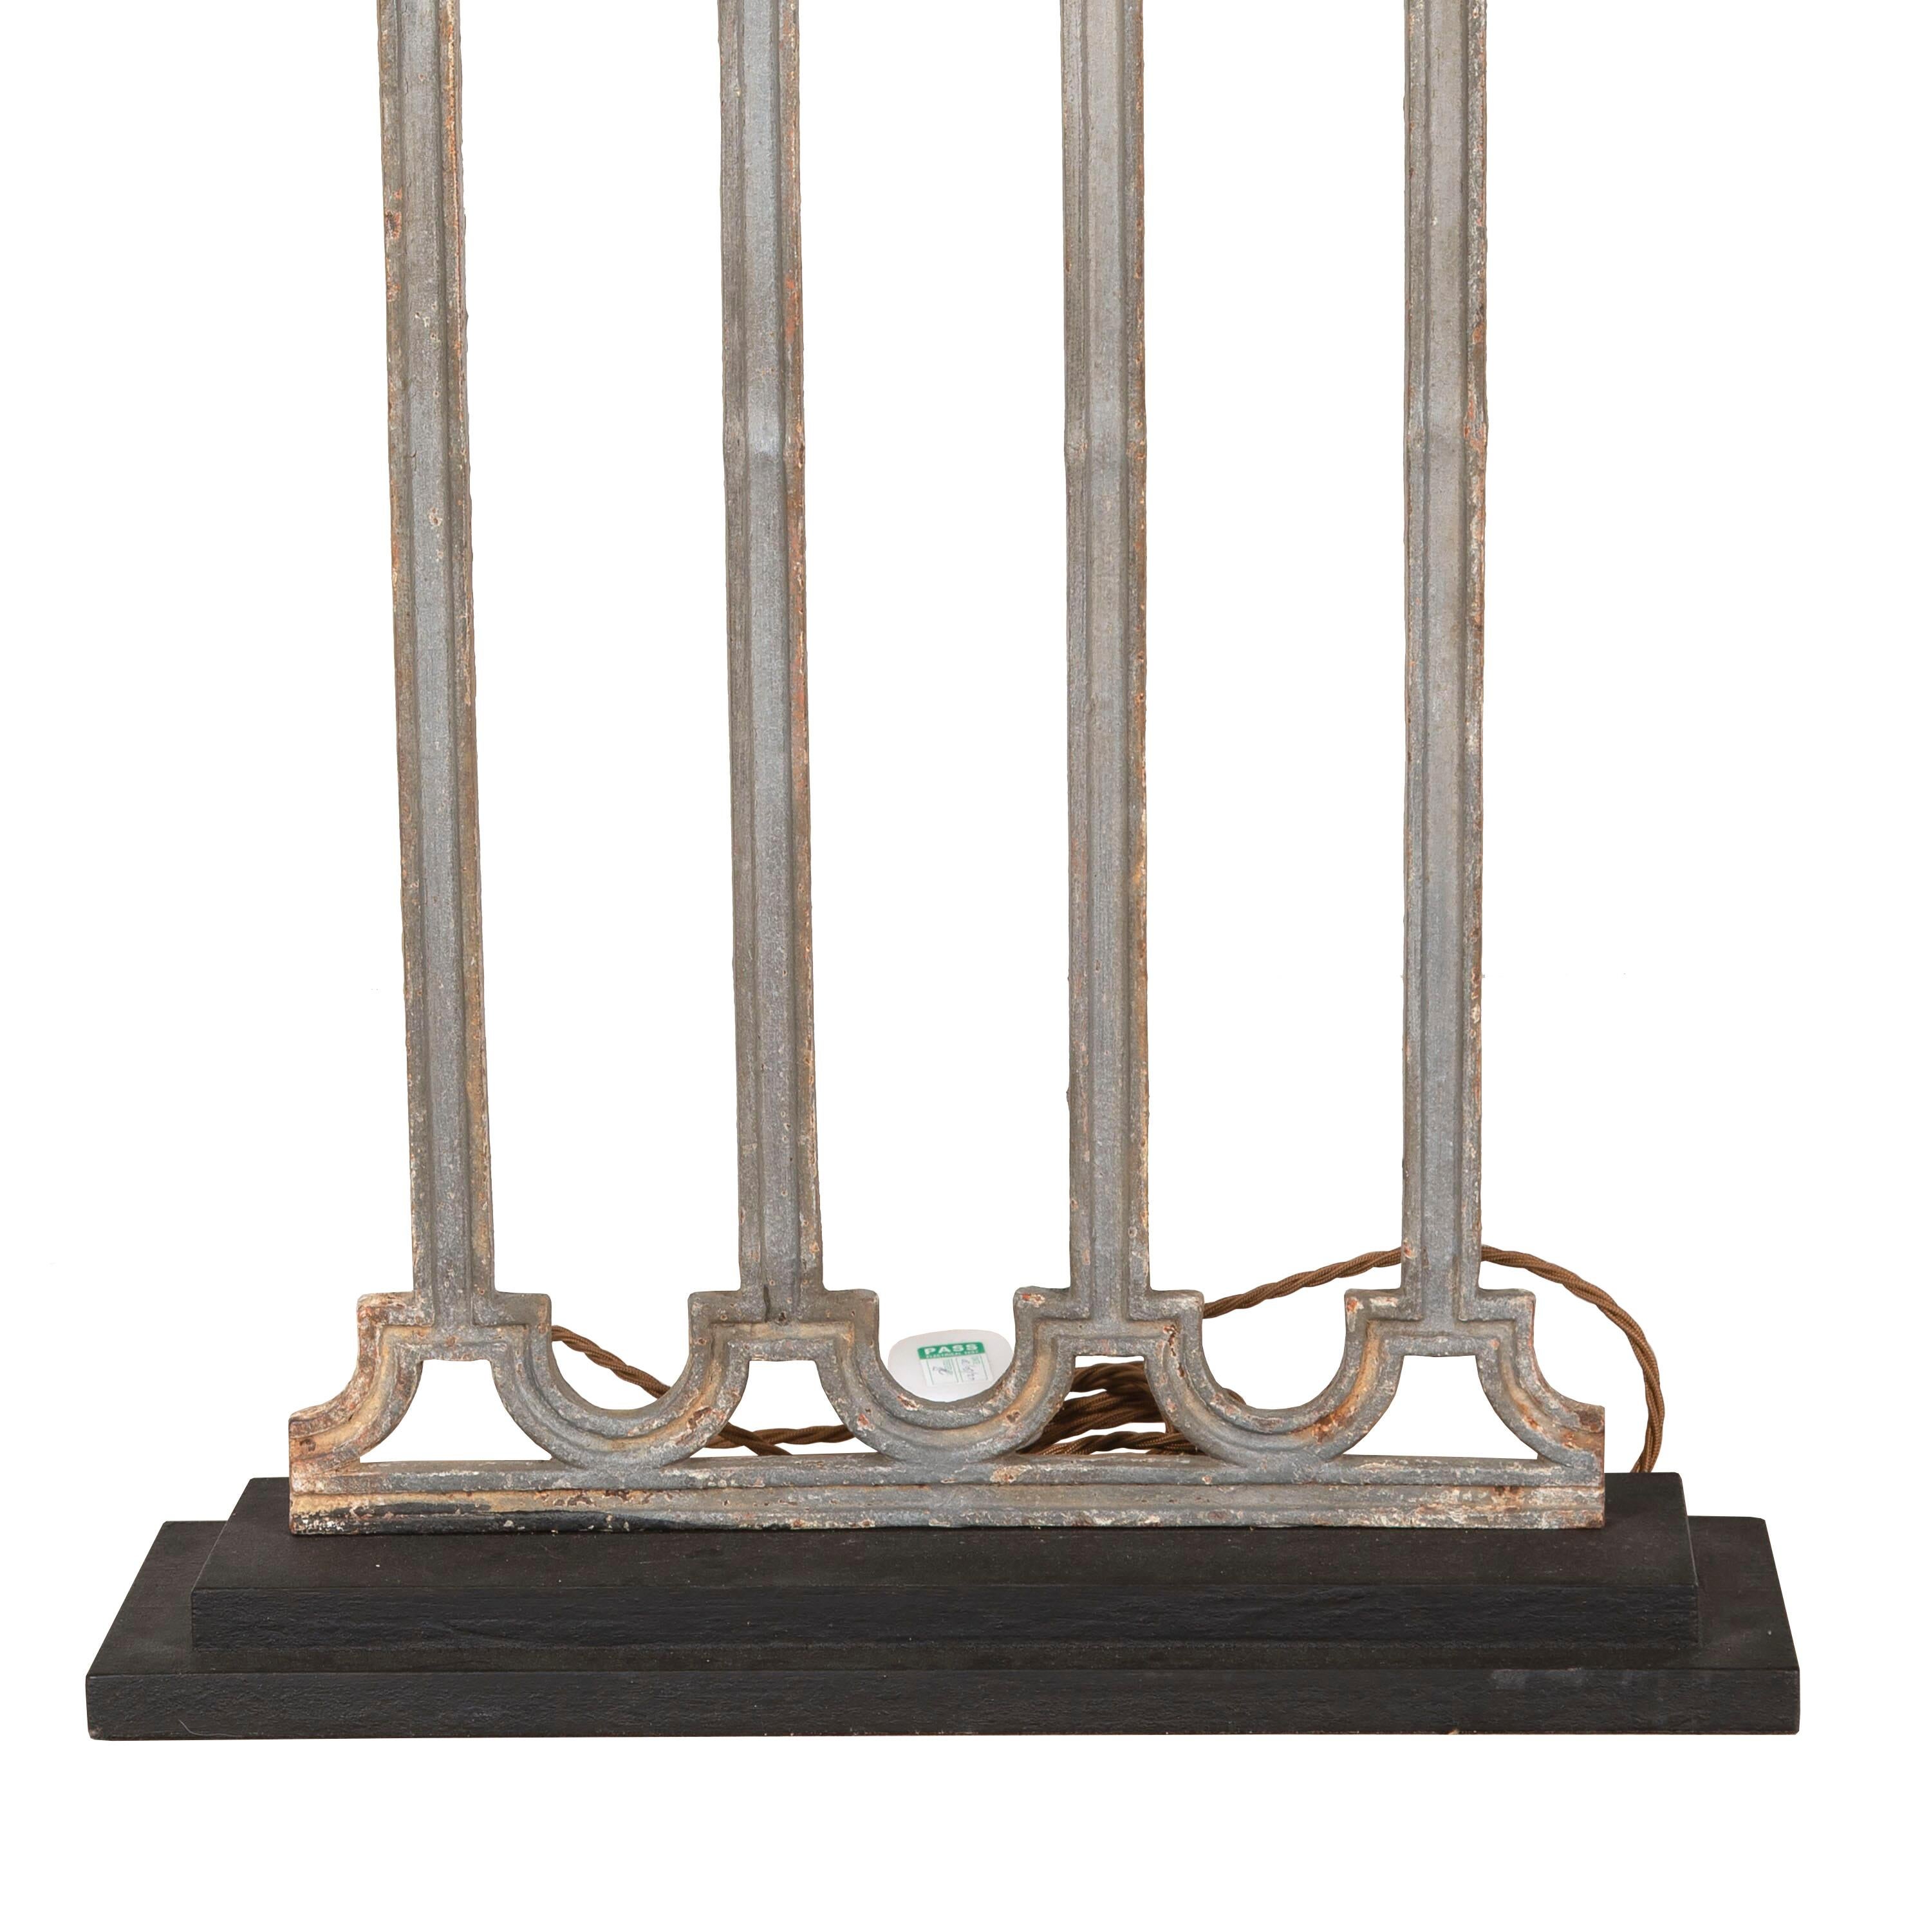 Pair of lamps made from wrought iron fragments that we have had converted in our artisan workshop.
With original patina, these lamps have been rewired and PAT tested to UK standards.
Height is to the bulb fitting, width and depth is of the